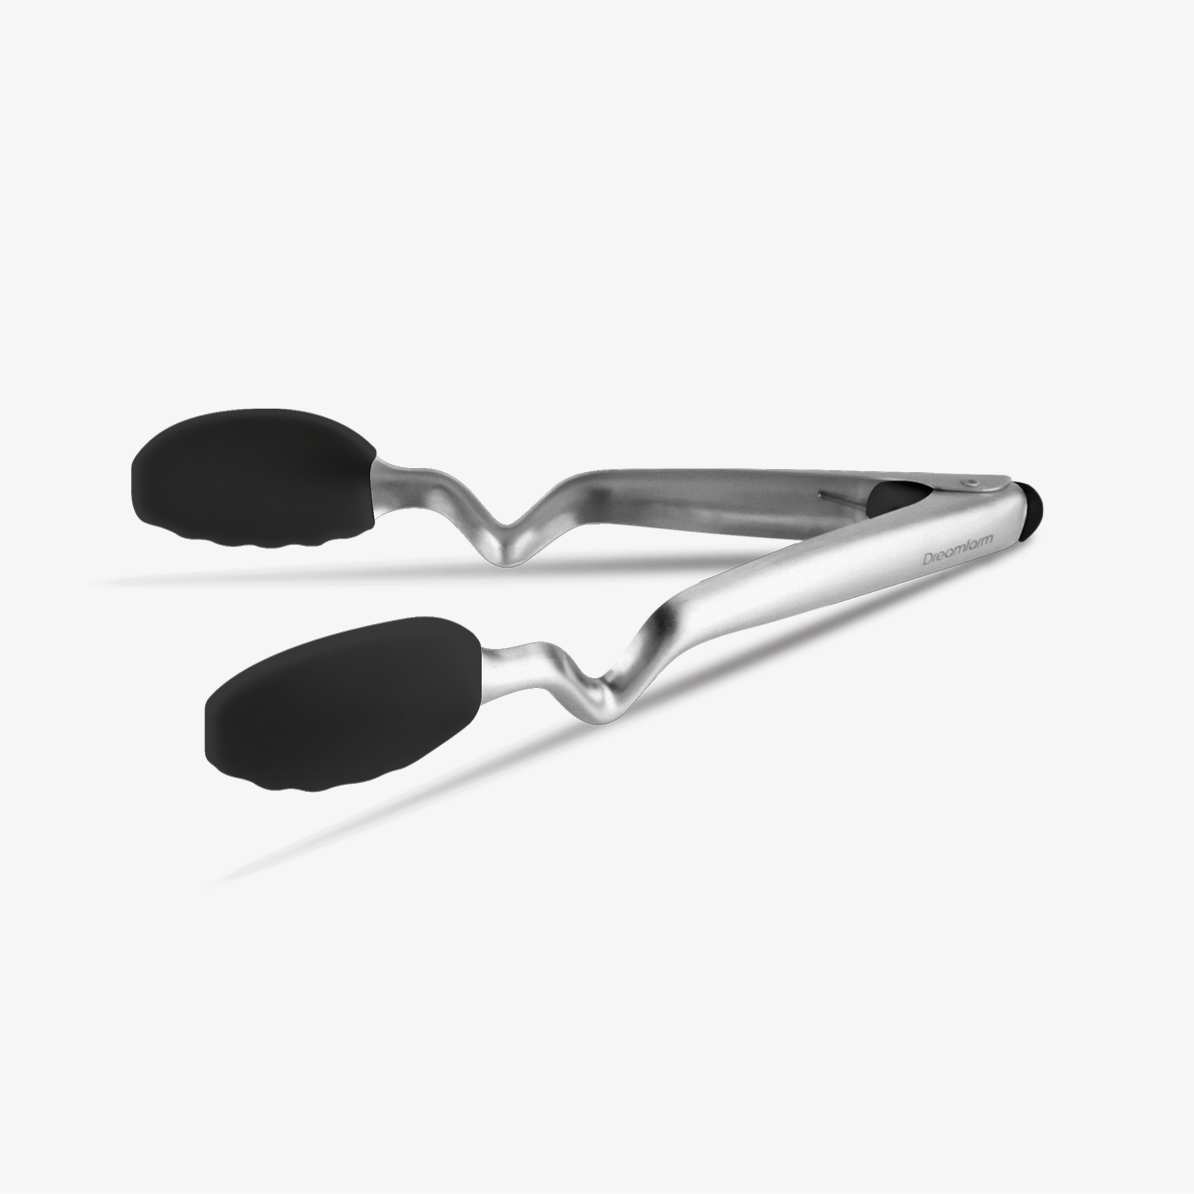 The ultimate all-in-one flipping, mixing and serving utensil is here with Dreamfarm's 12" Clongs Silicone Tongs in Black. These unique tongs stand out from the crowd and sit up on your counter with a C-shaped bend in the handle that keeps the tips pointed up to prevent messes.